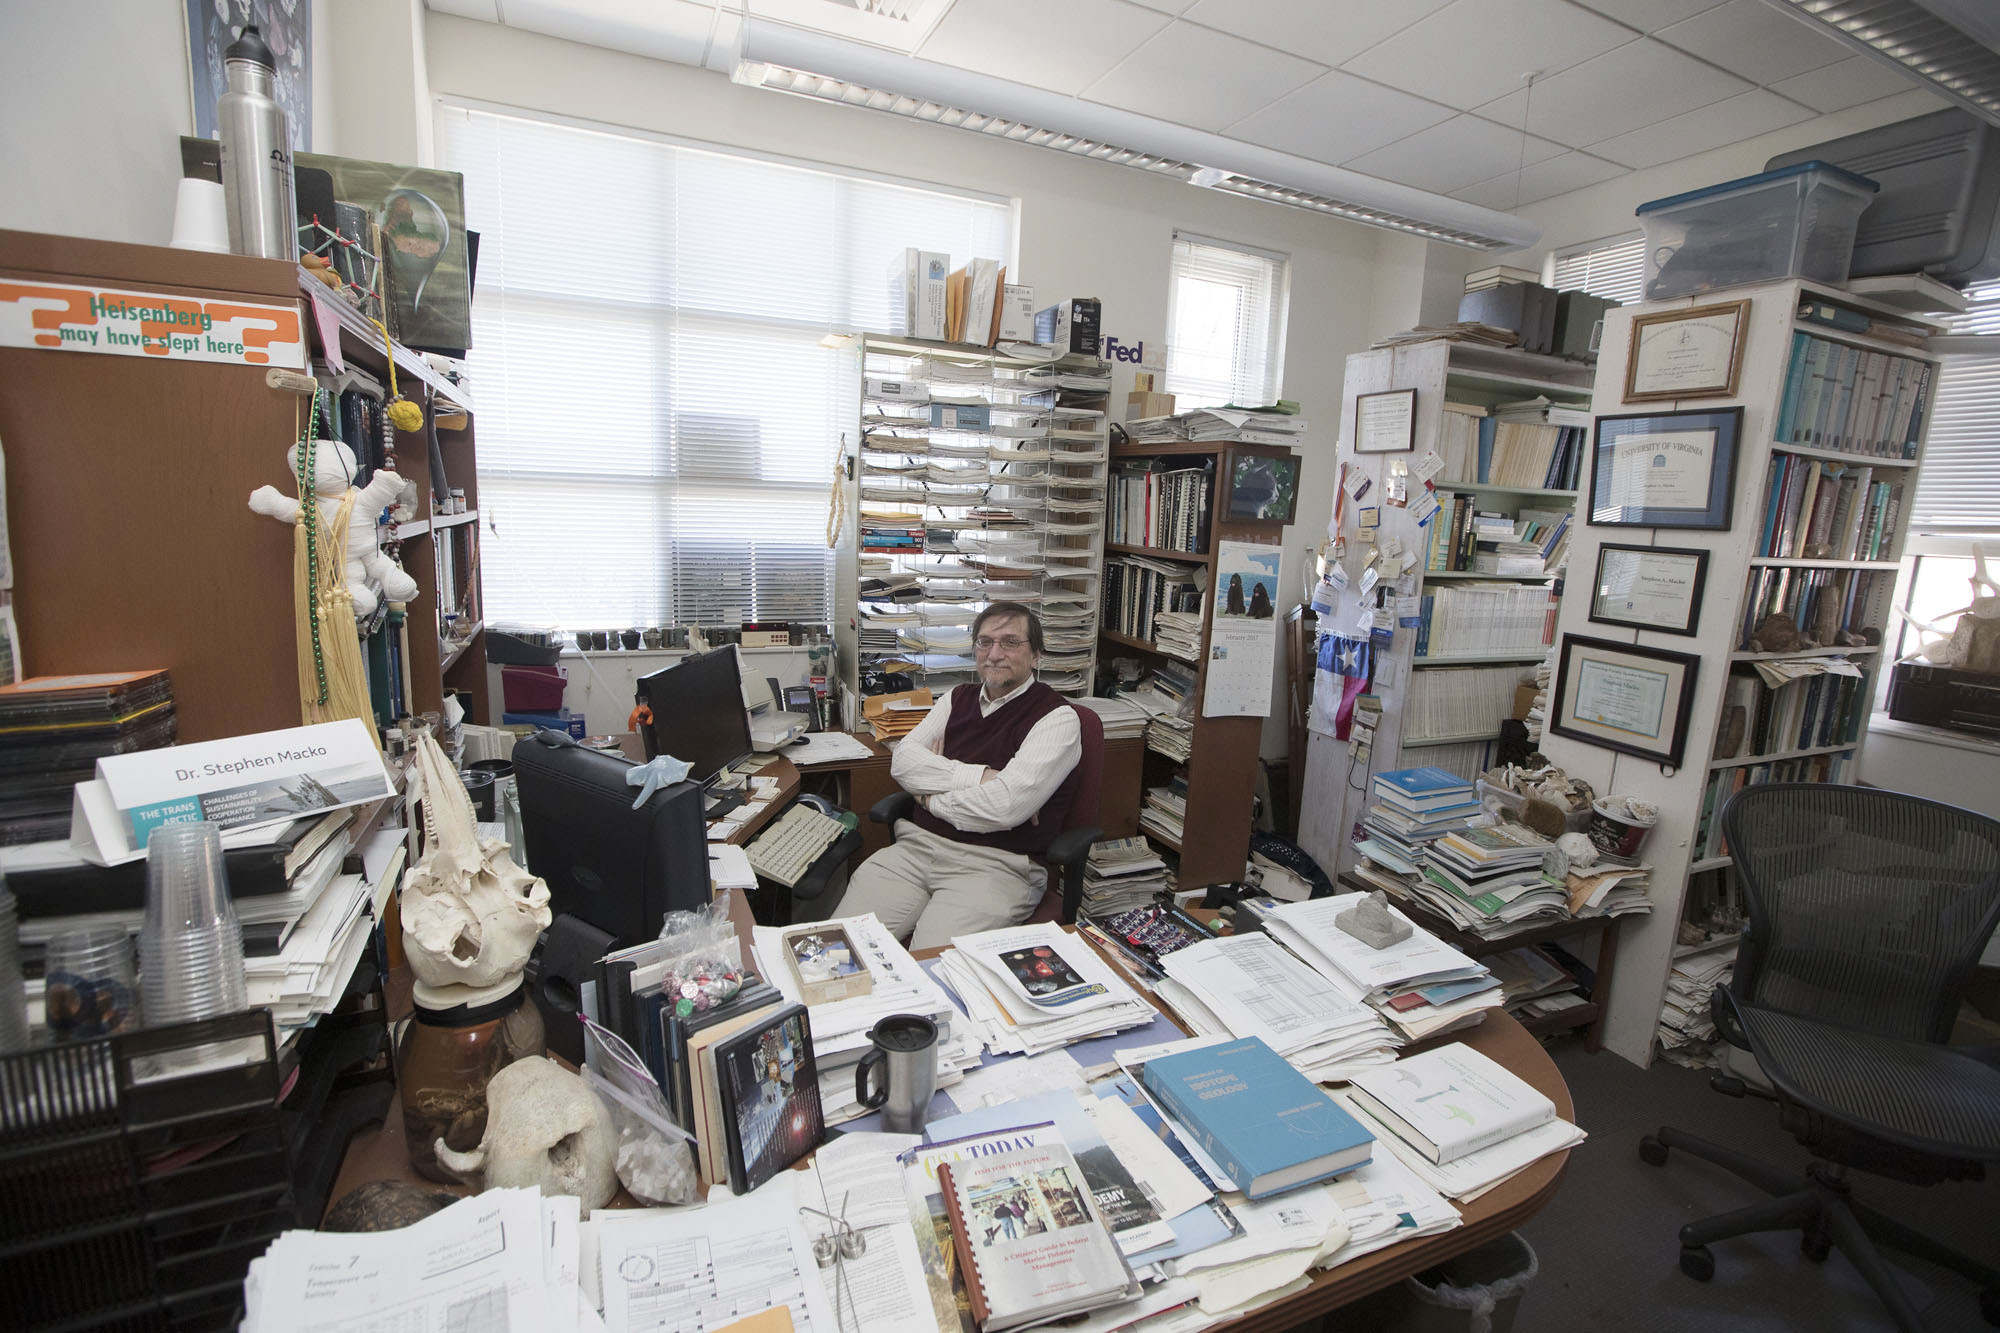 Steve Macko sits at this desk surrounded by books smiling at the camera